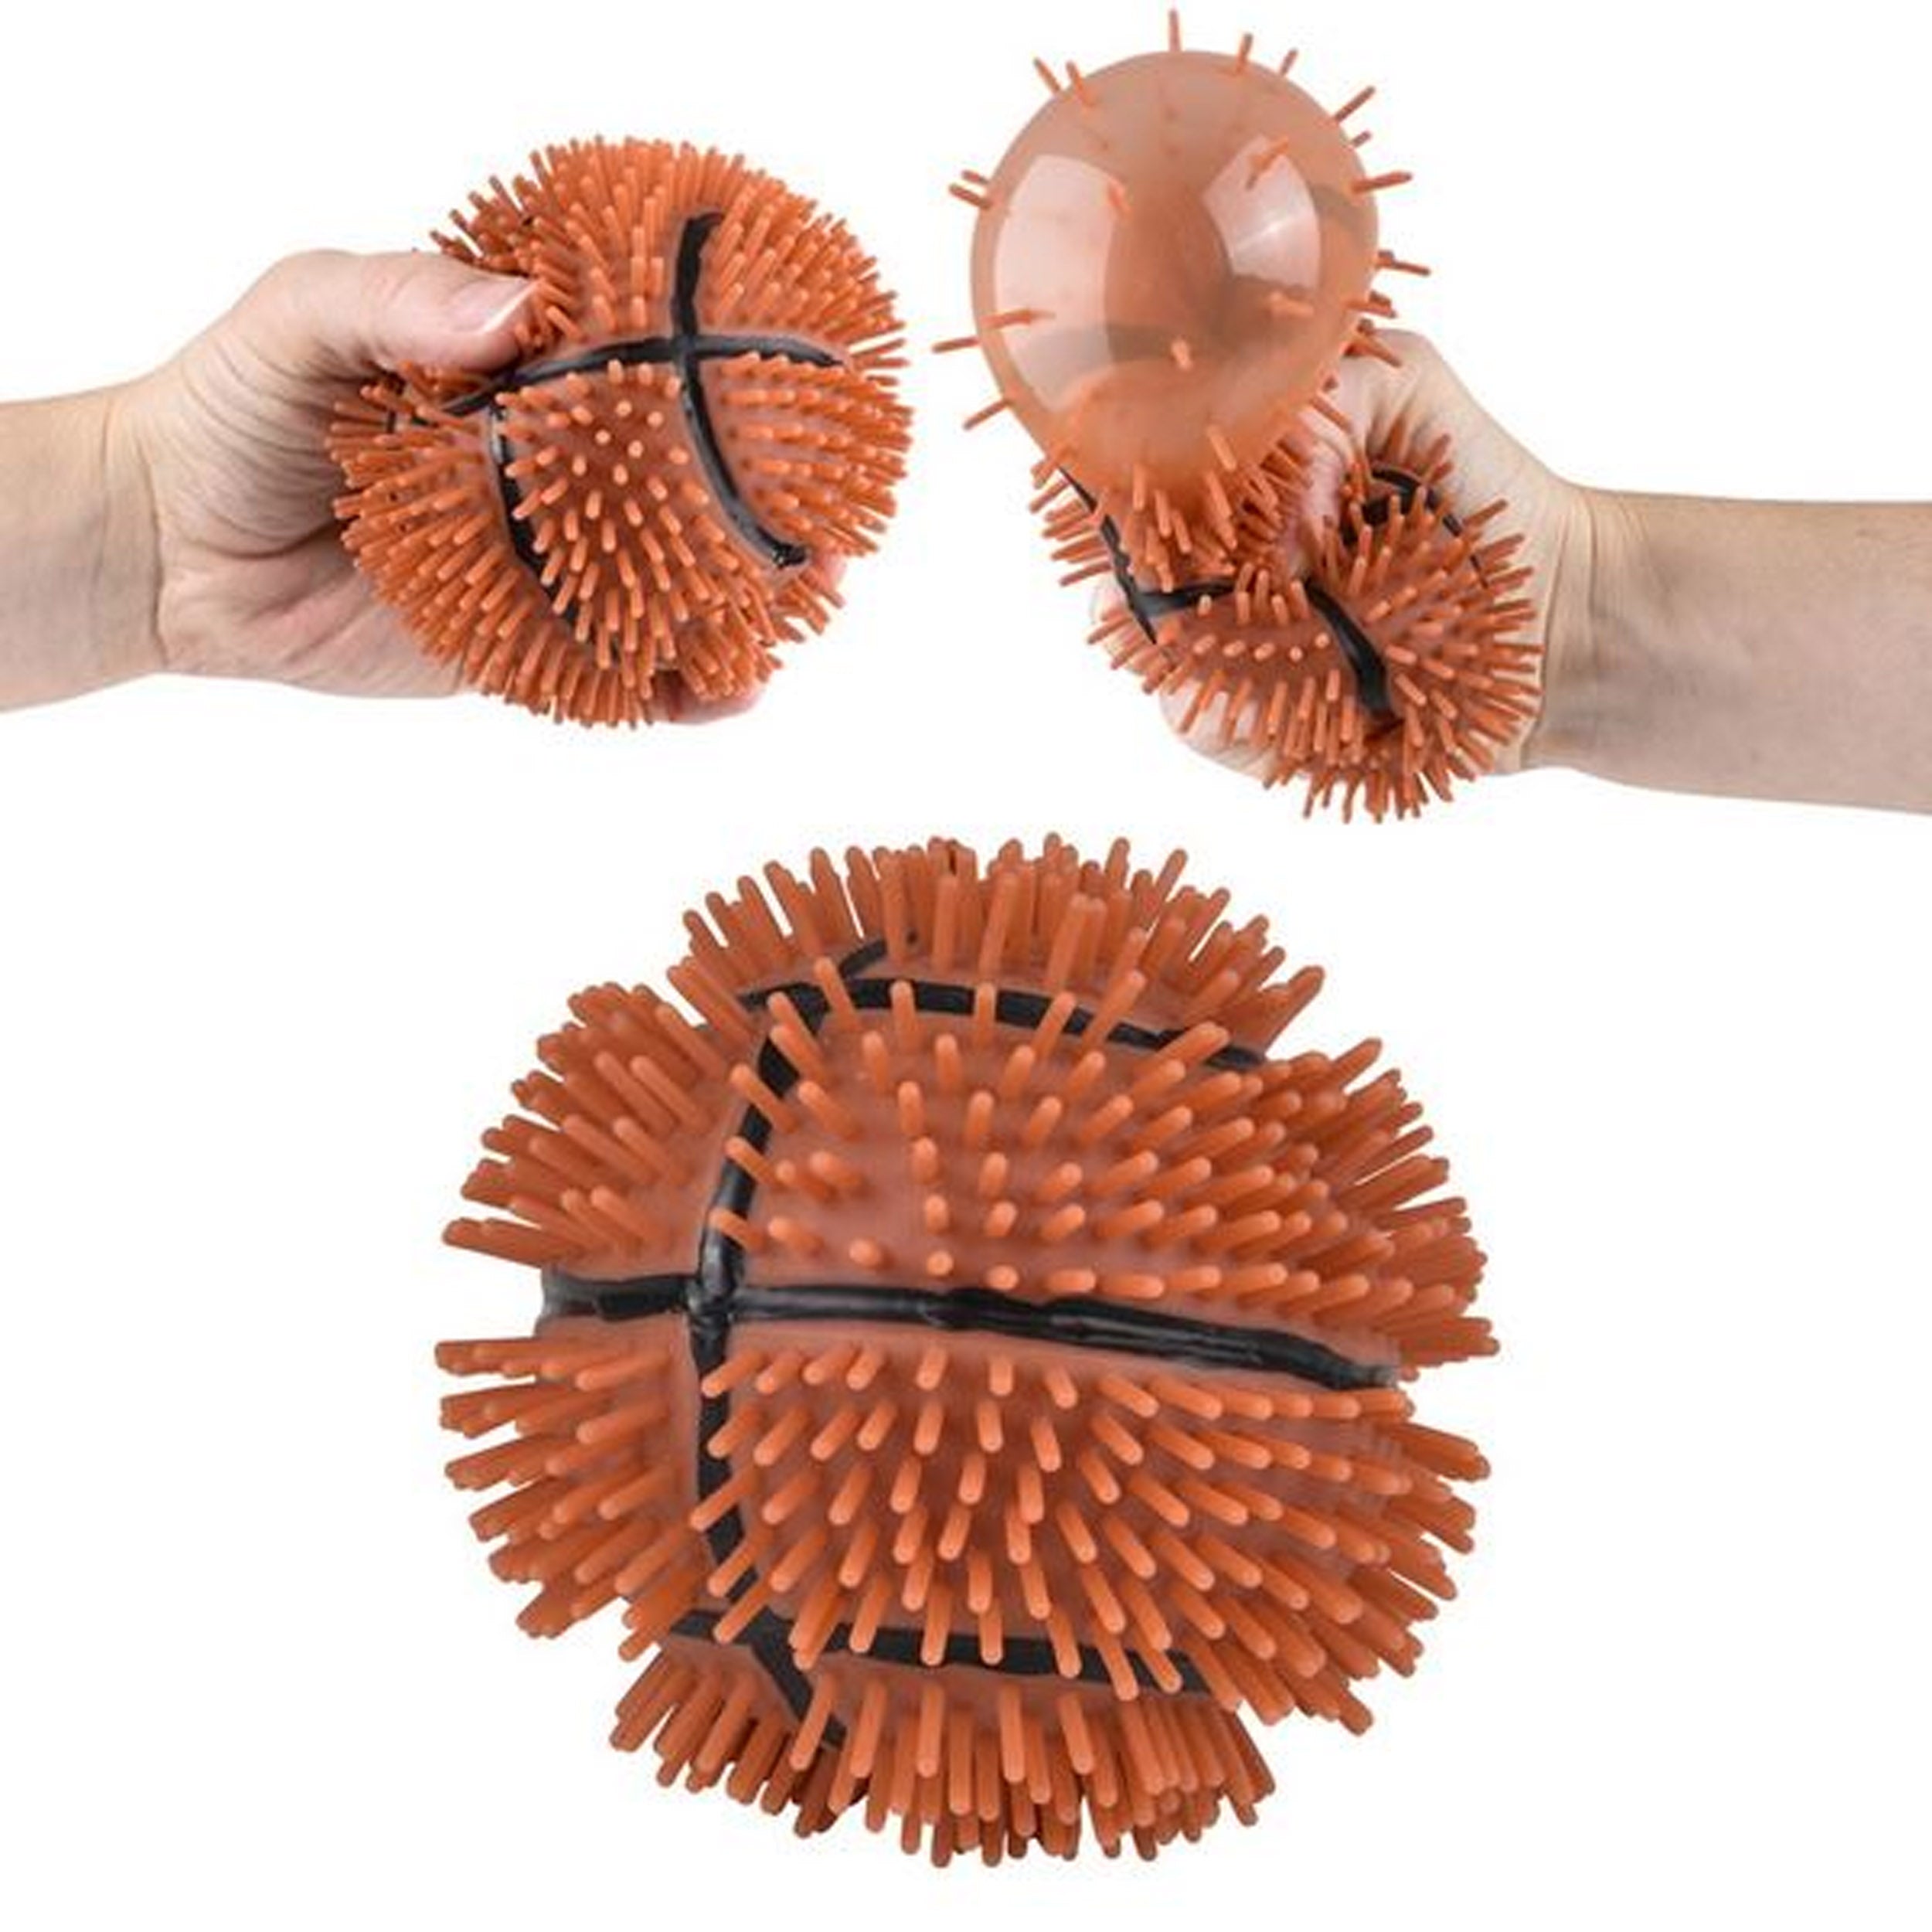 Bubble Squeeze Basketball Puffer Balls Air Filled Center Super Squeezable Texture Soft Rubbery Spikes